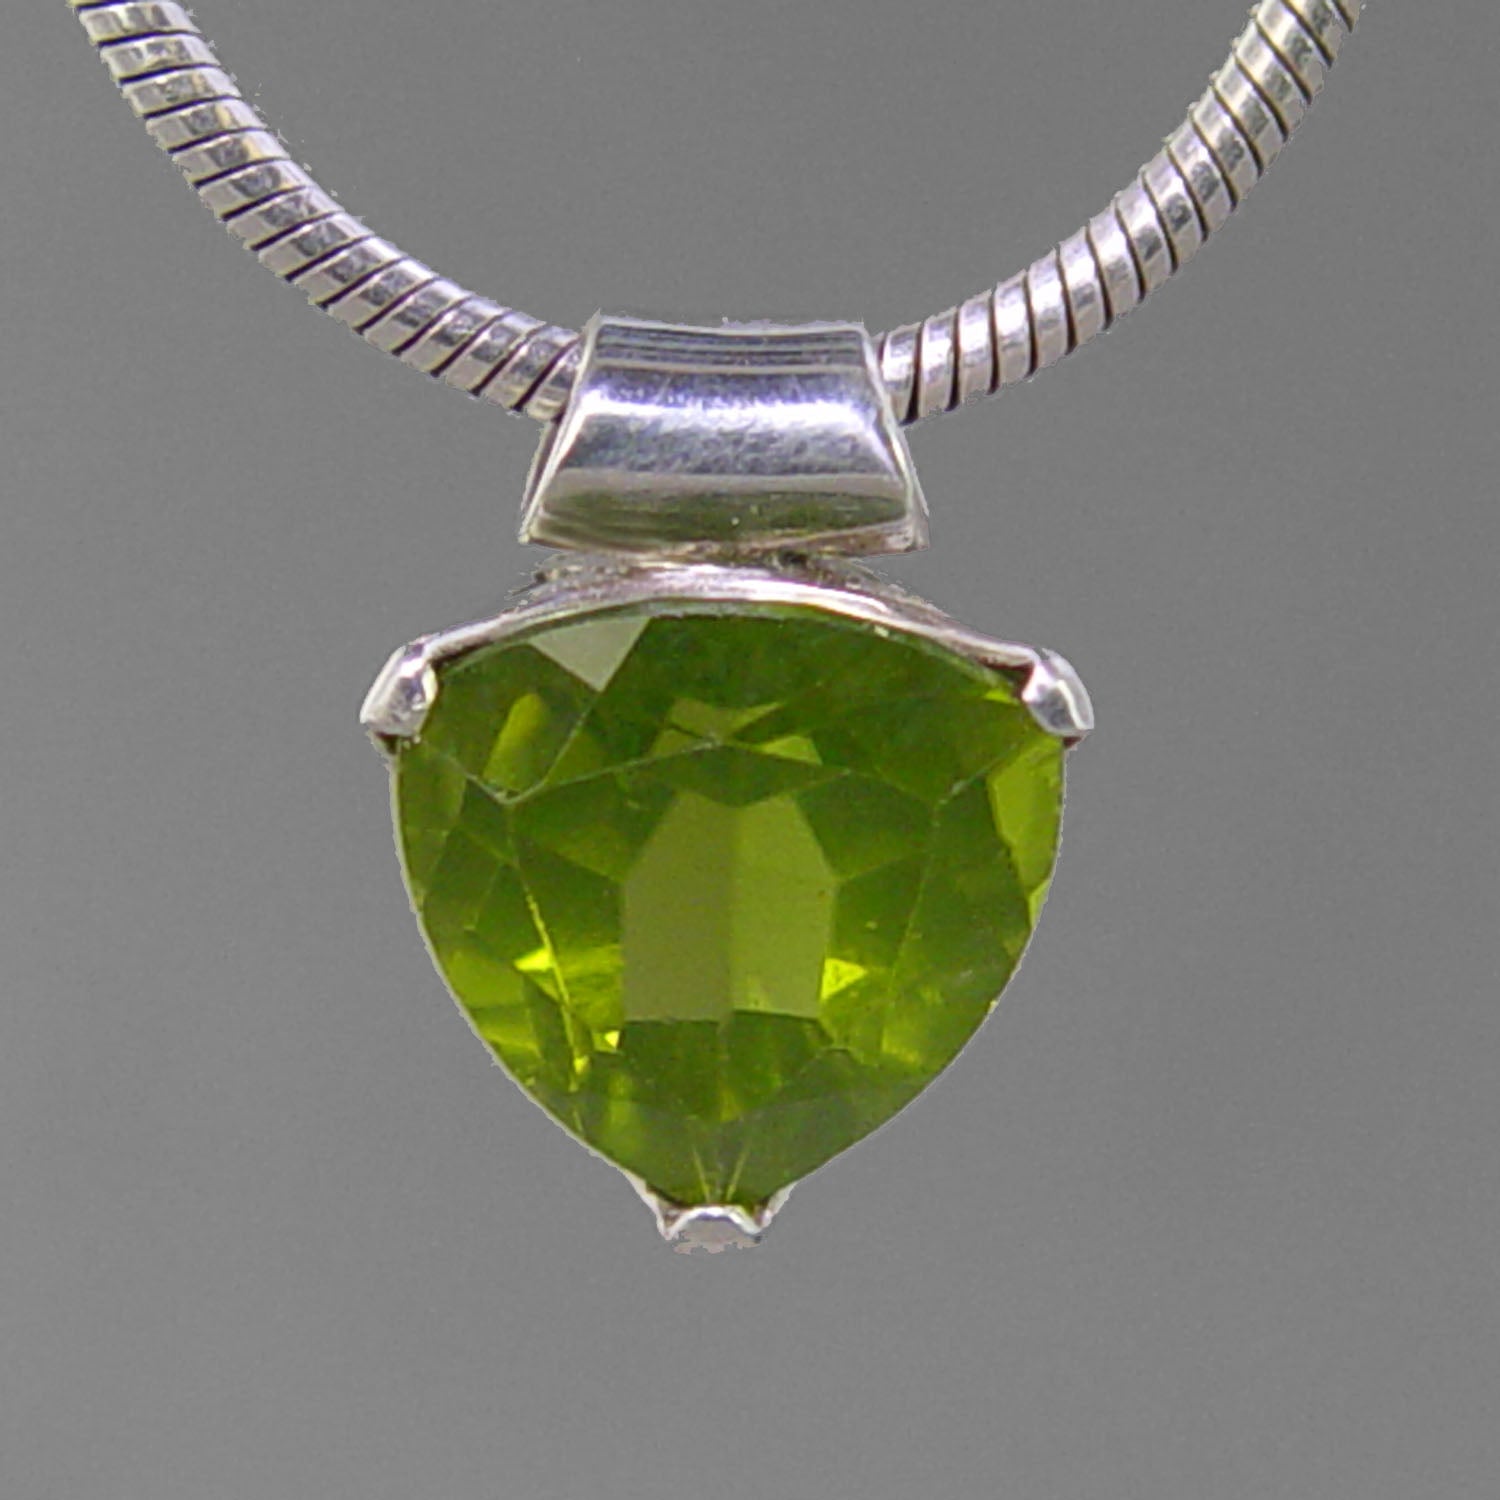 Peridot 6.76 ct Faceted Trillion Cut Sterling Silver Pendant